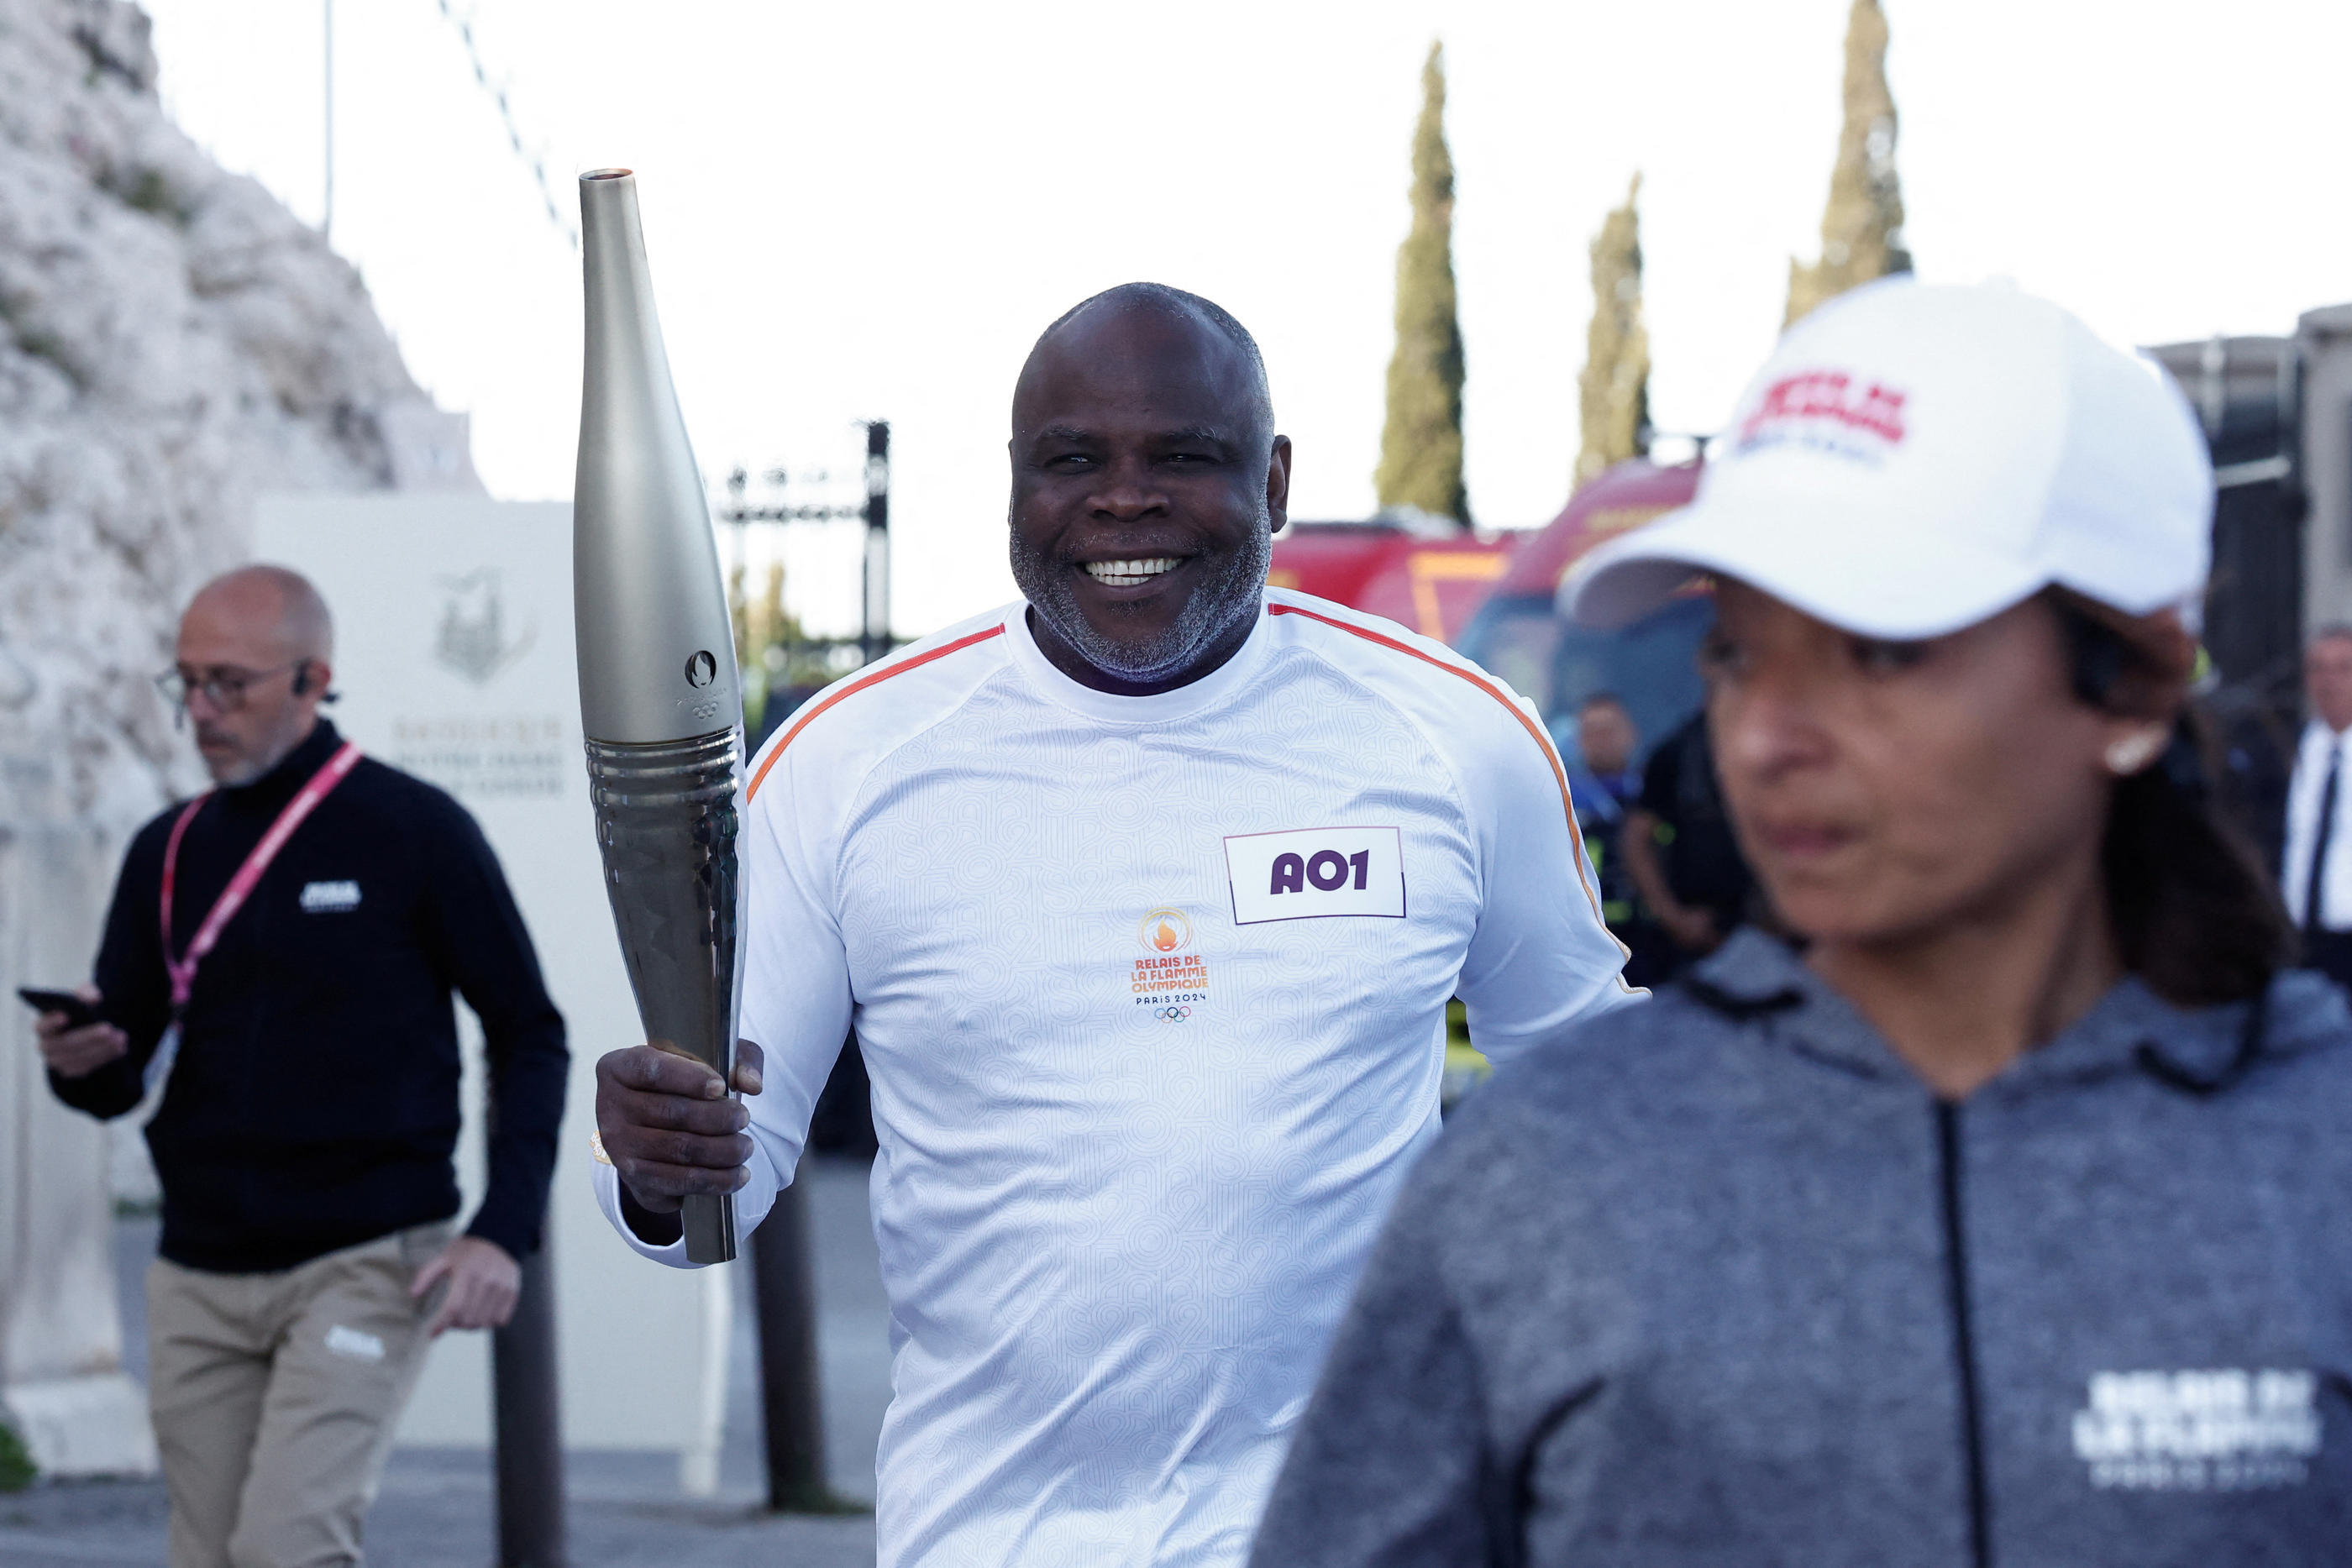 Torch bearer French former football player Basile Boli holds the Olympics torch during the relay ahead Paris 2024 Olympic games in Marseille, France, May 9, 2024. REUTERS/Benoit Tessier